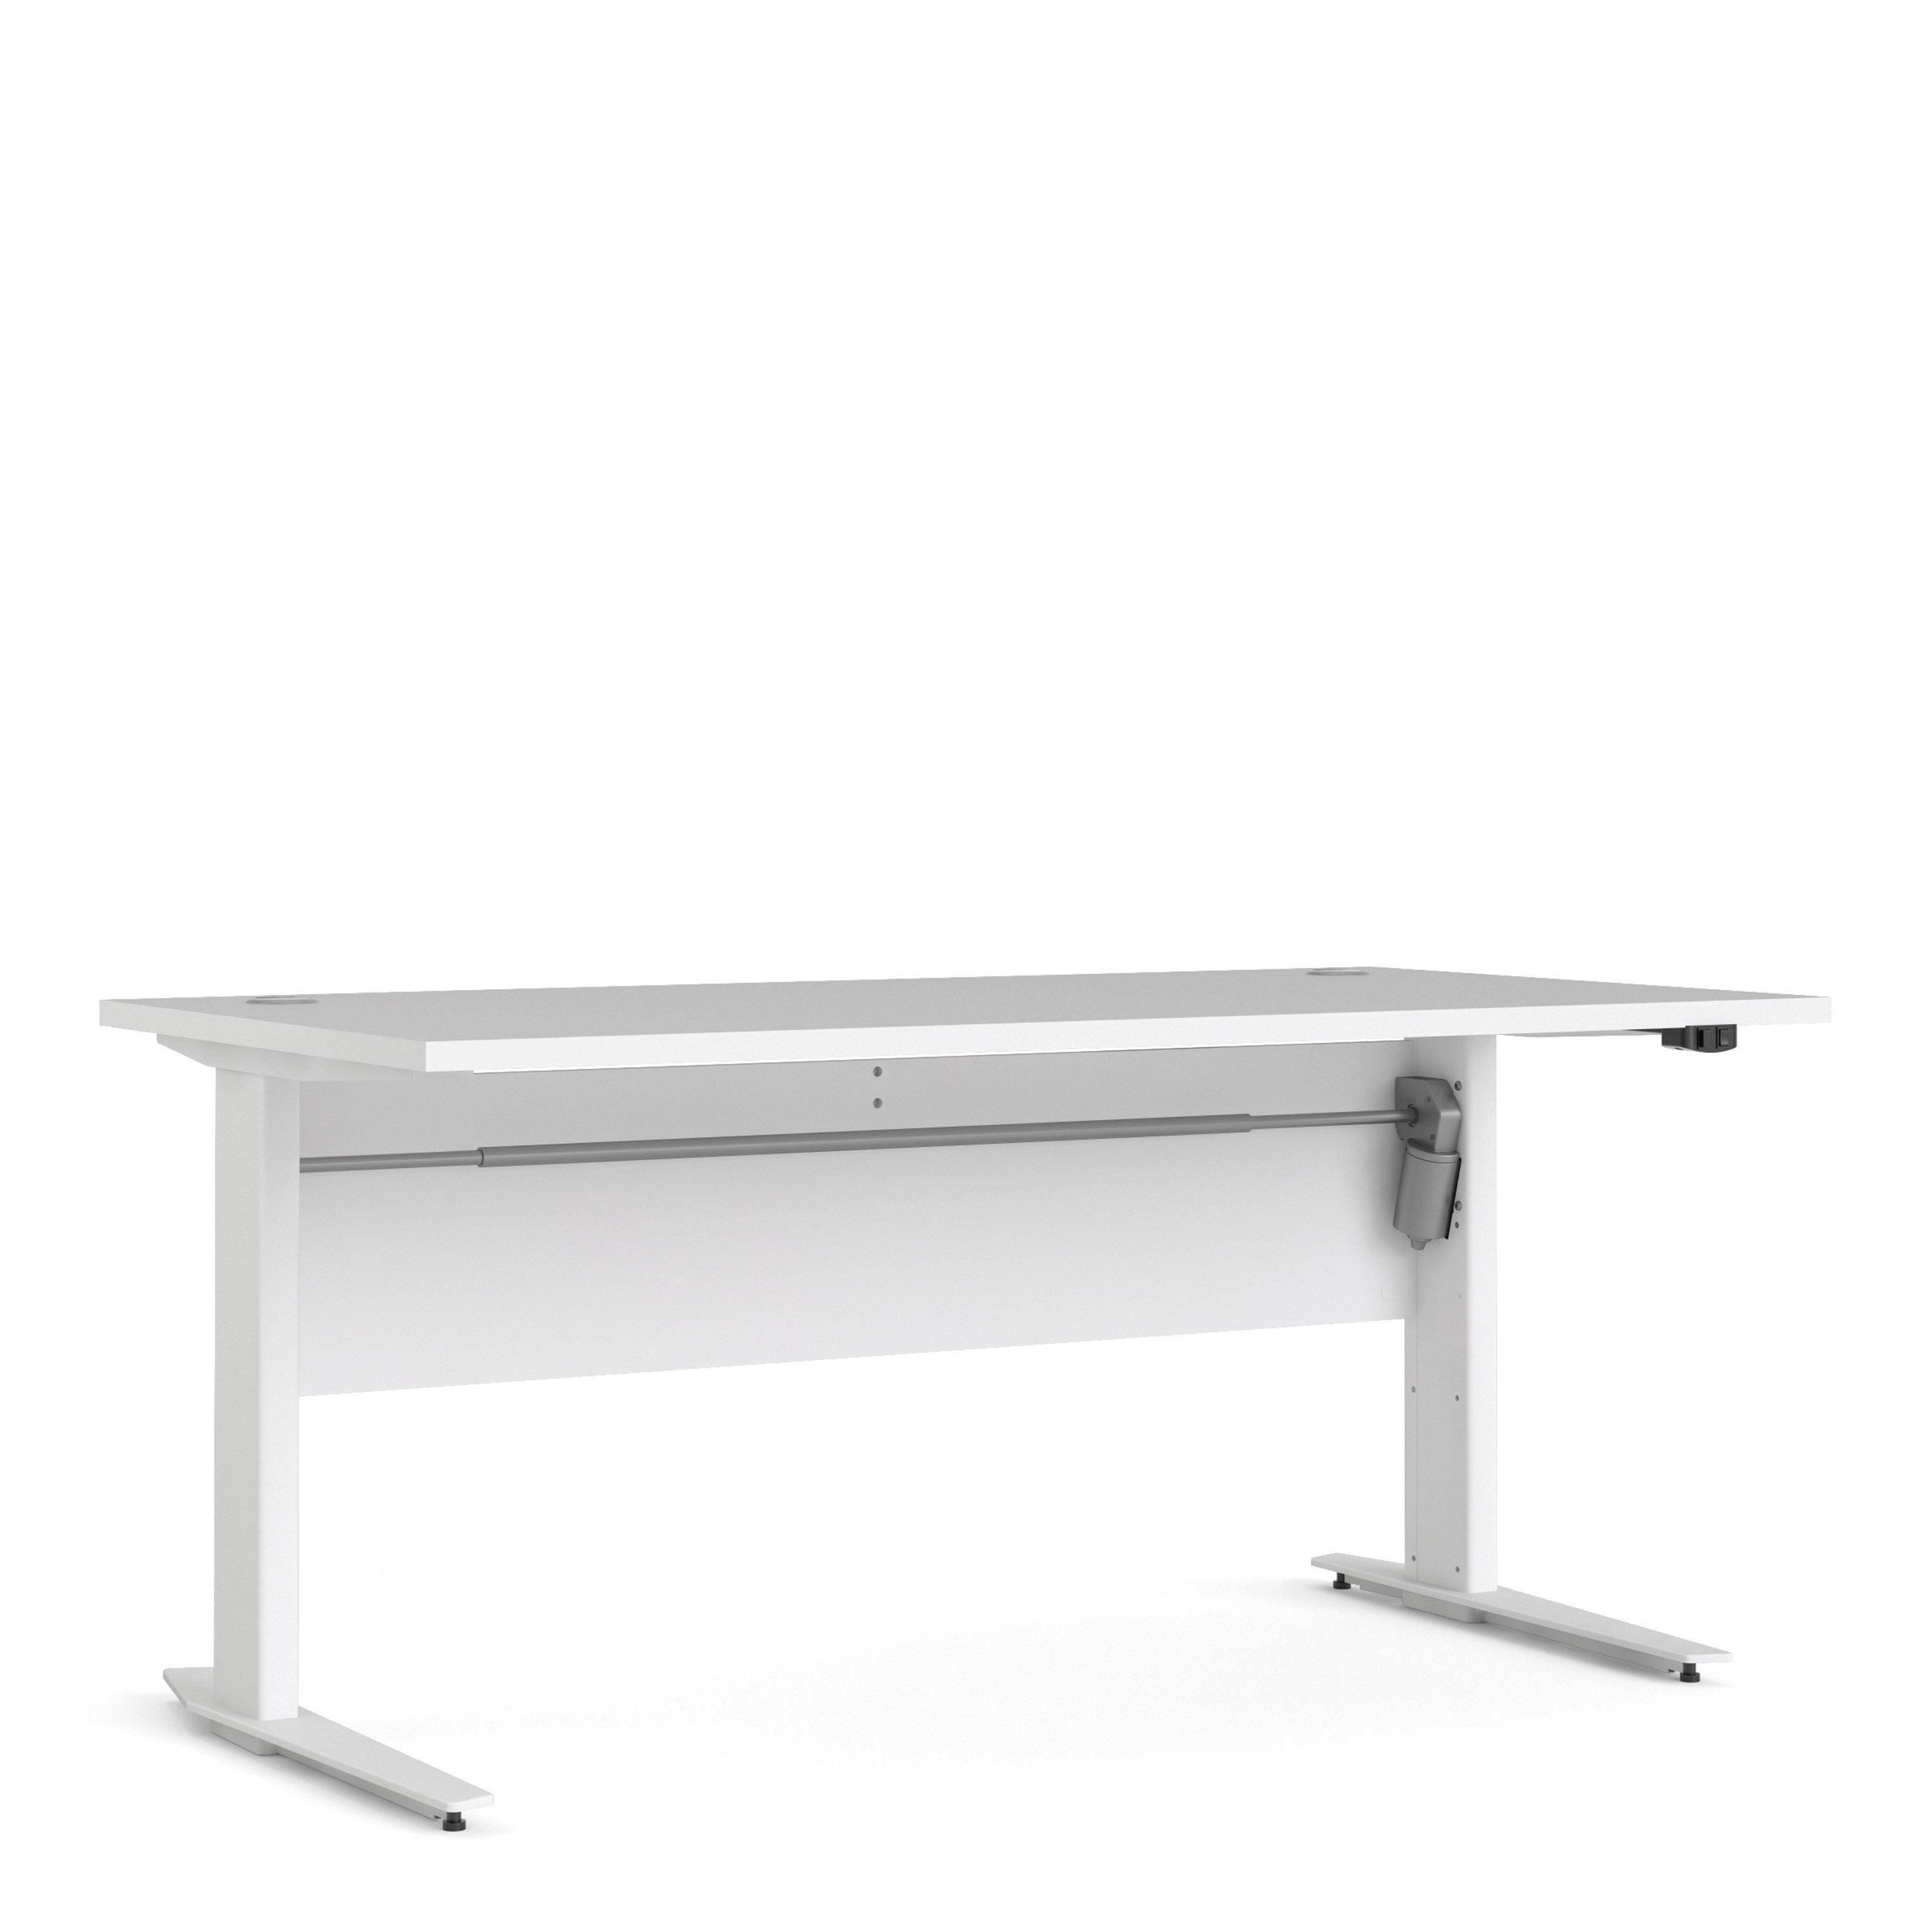 Prima Desk 150cm with Height Adjustable Legs with Electric control - image 1